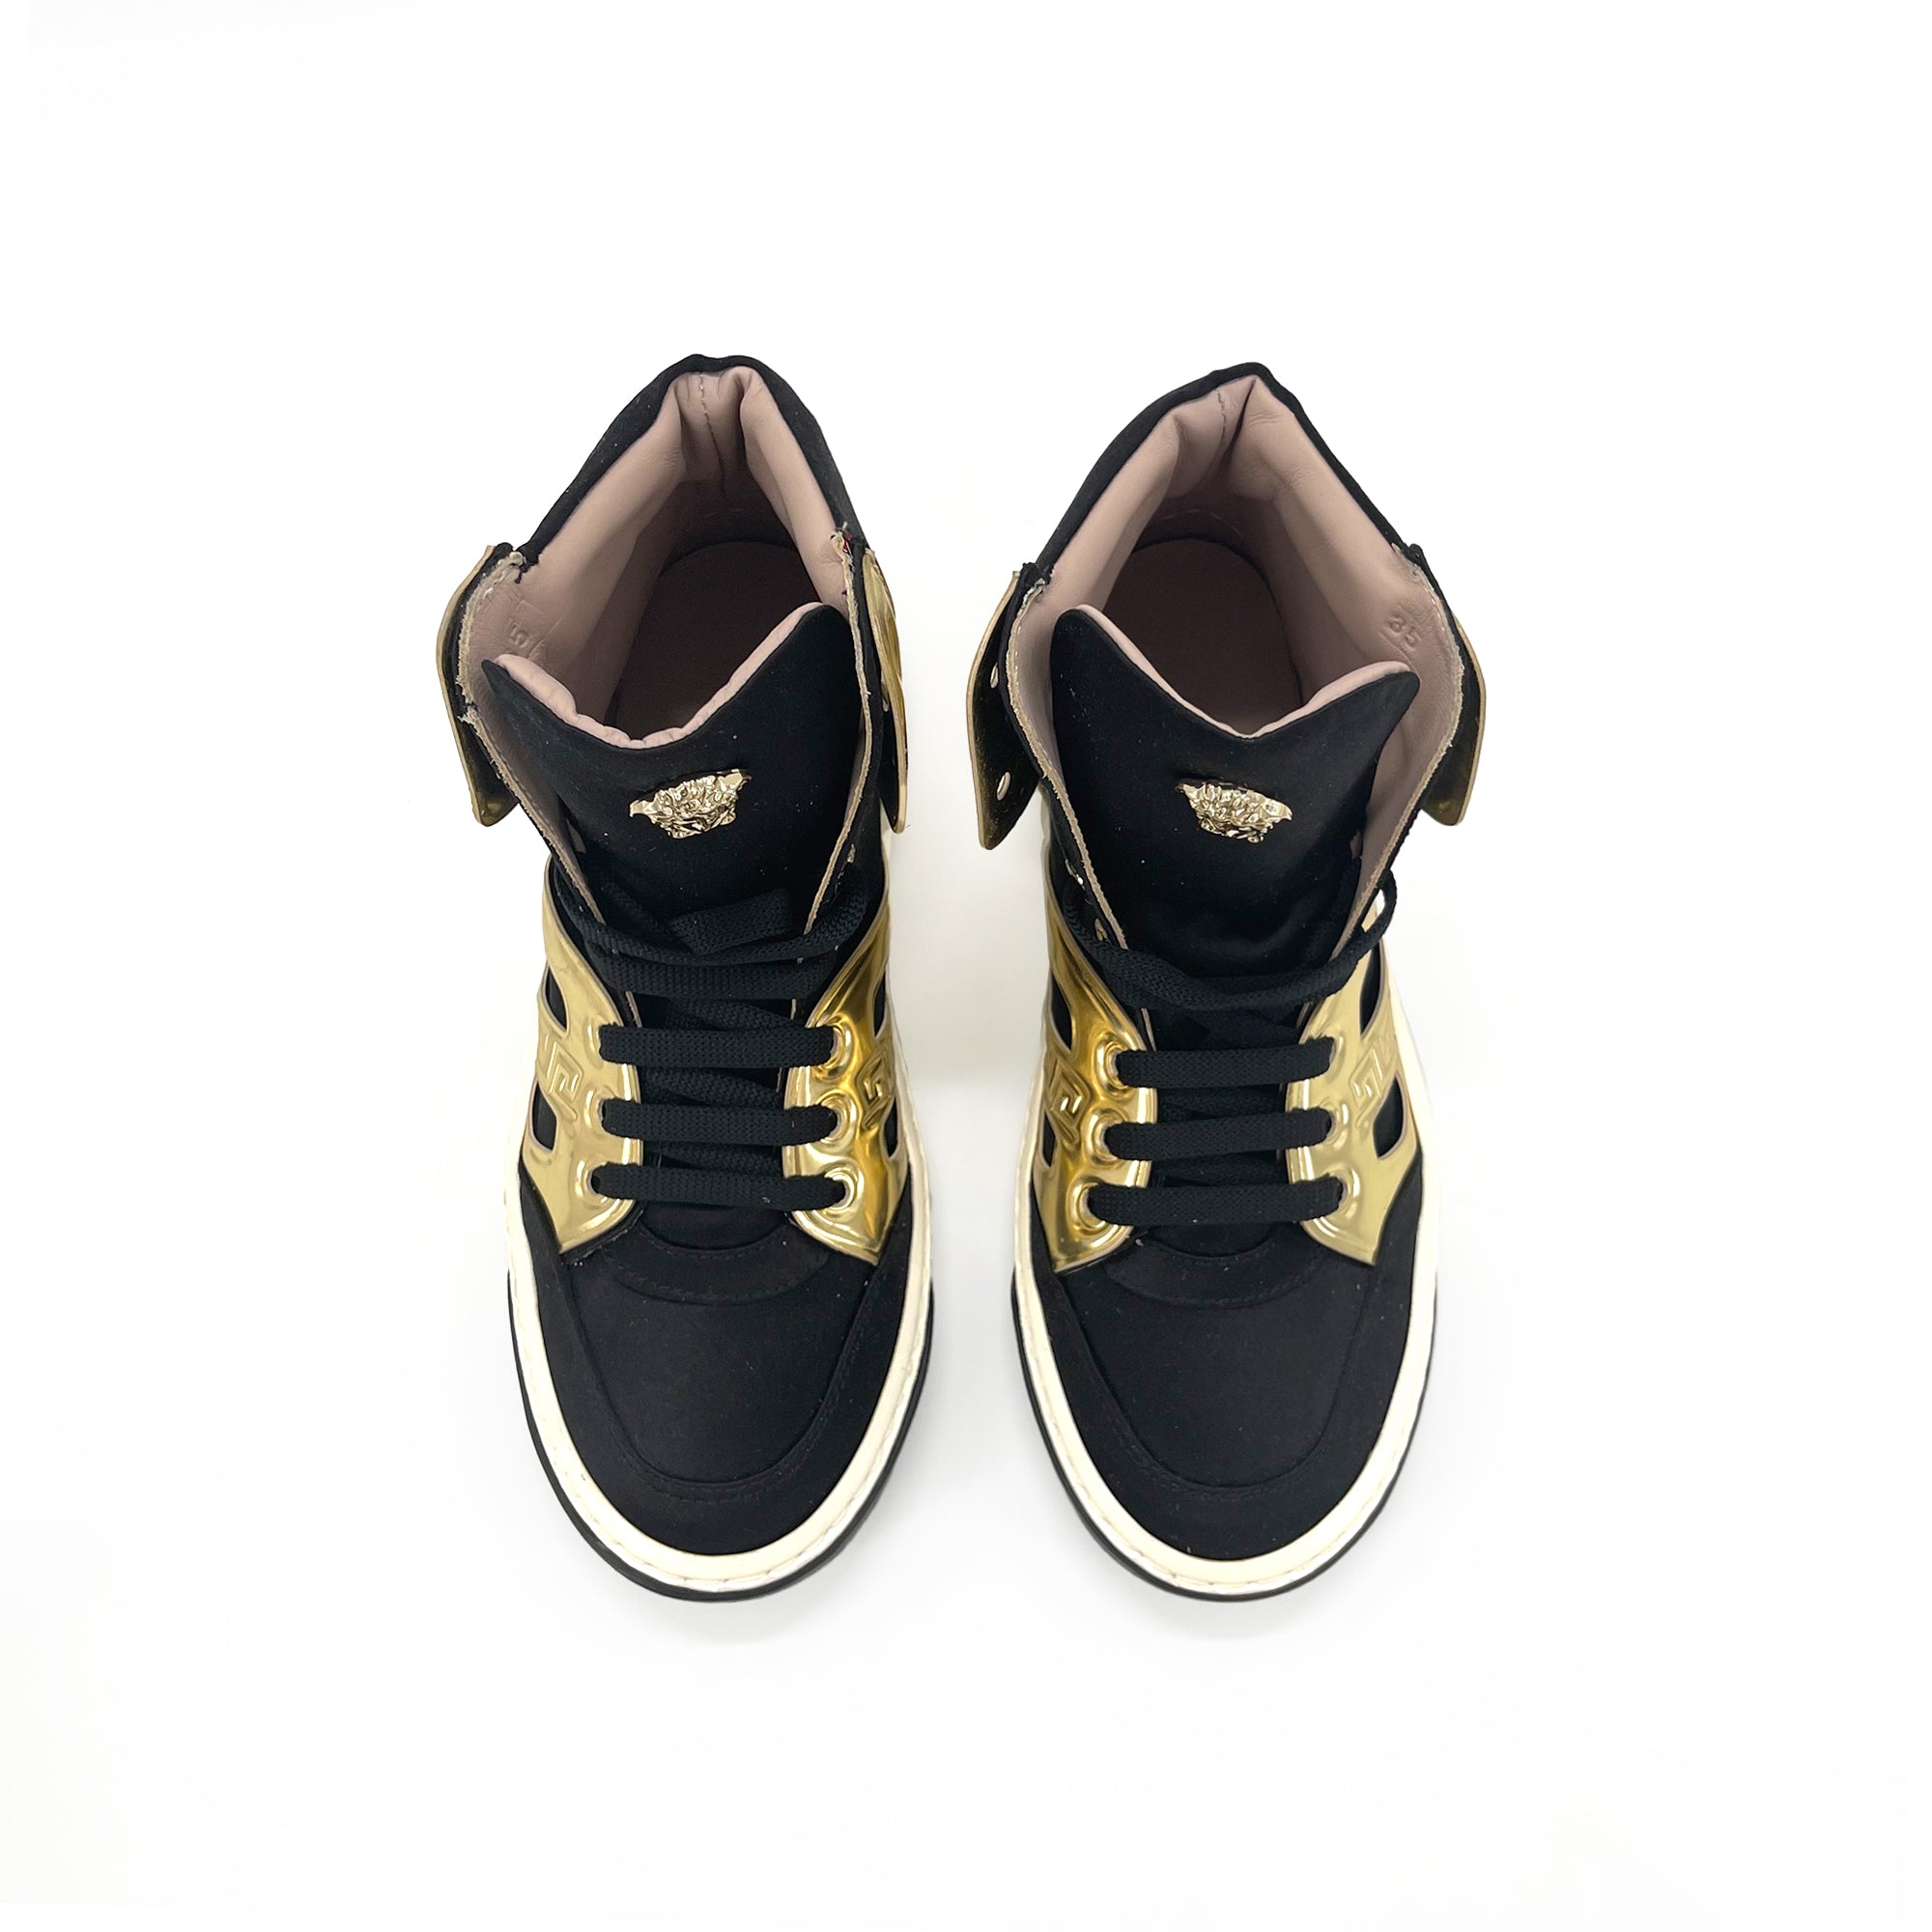 Girls Black High-Top Trainers